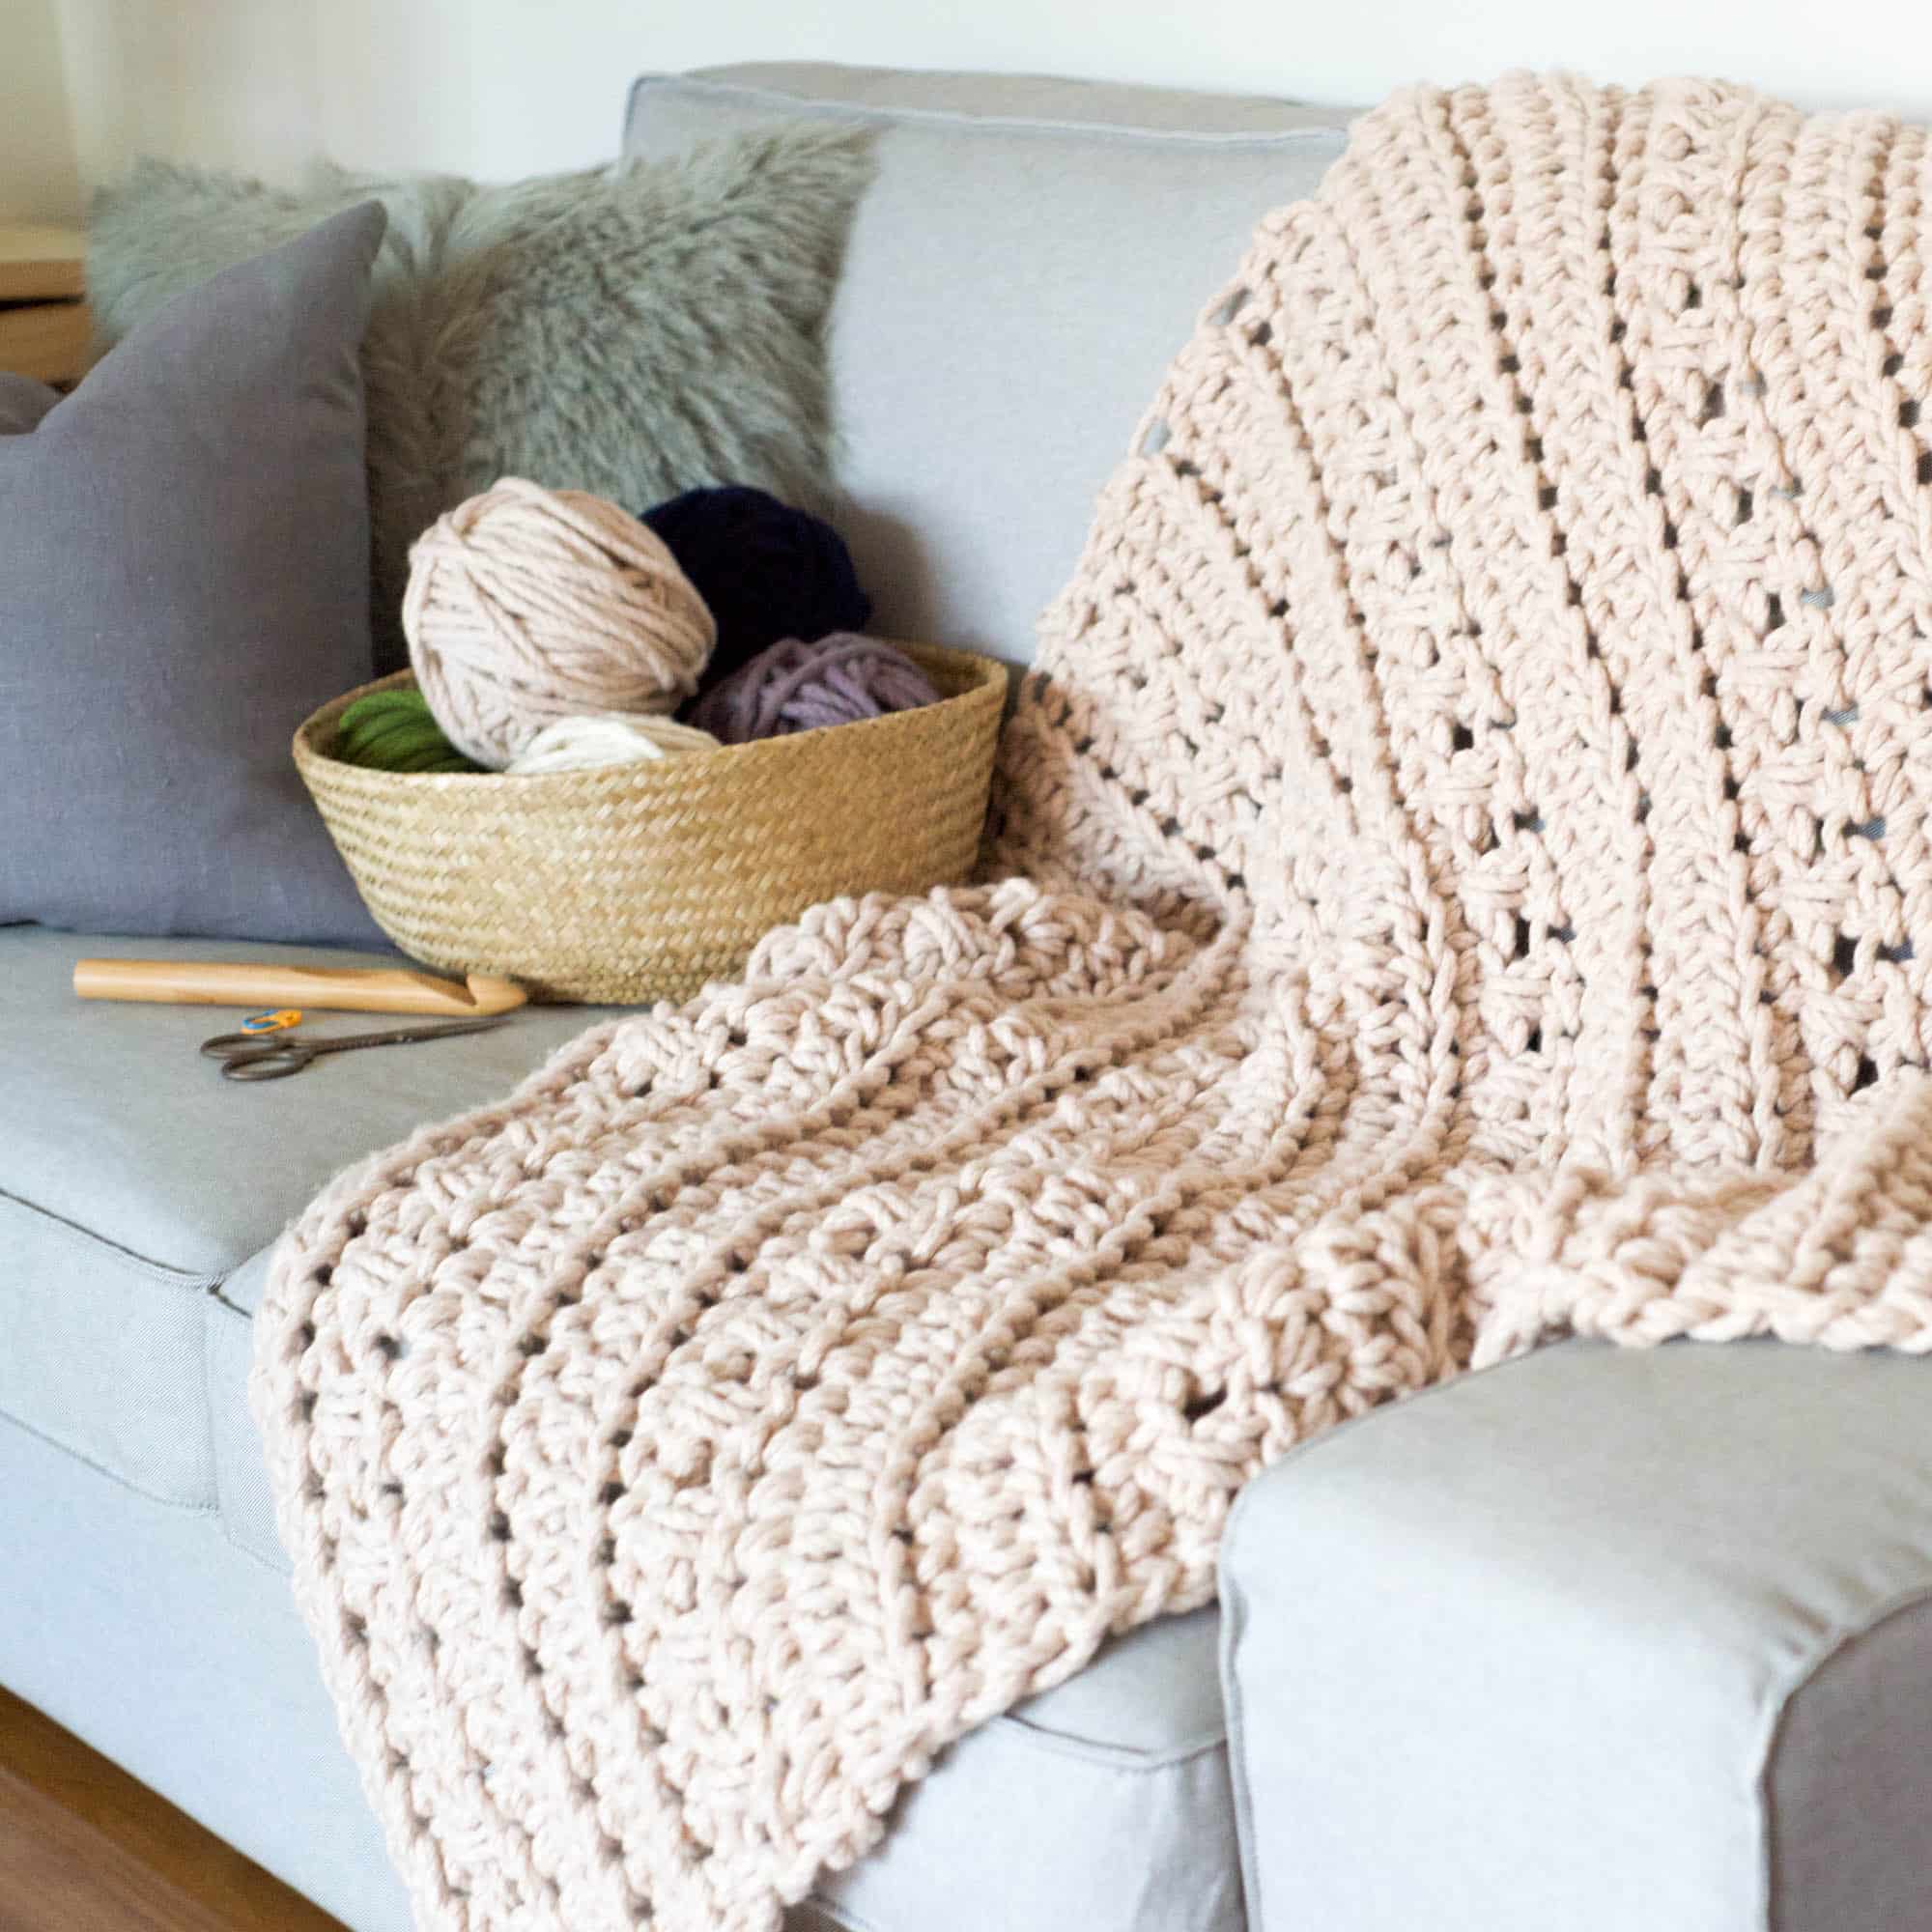 How Much Yarn For A Crochet Blanket - How To Calculate Materials